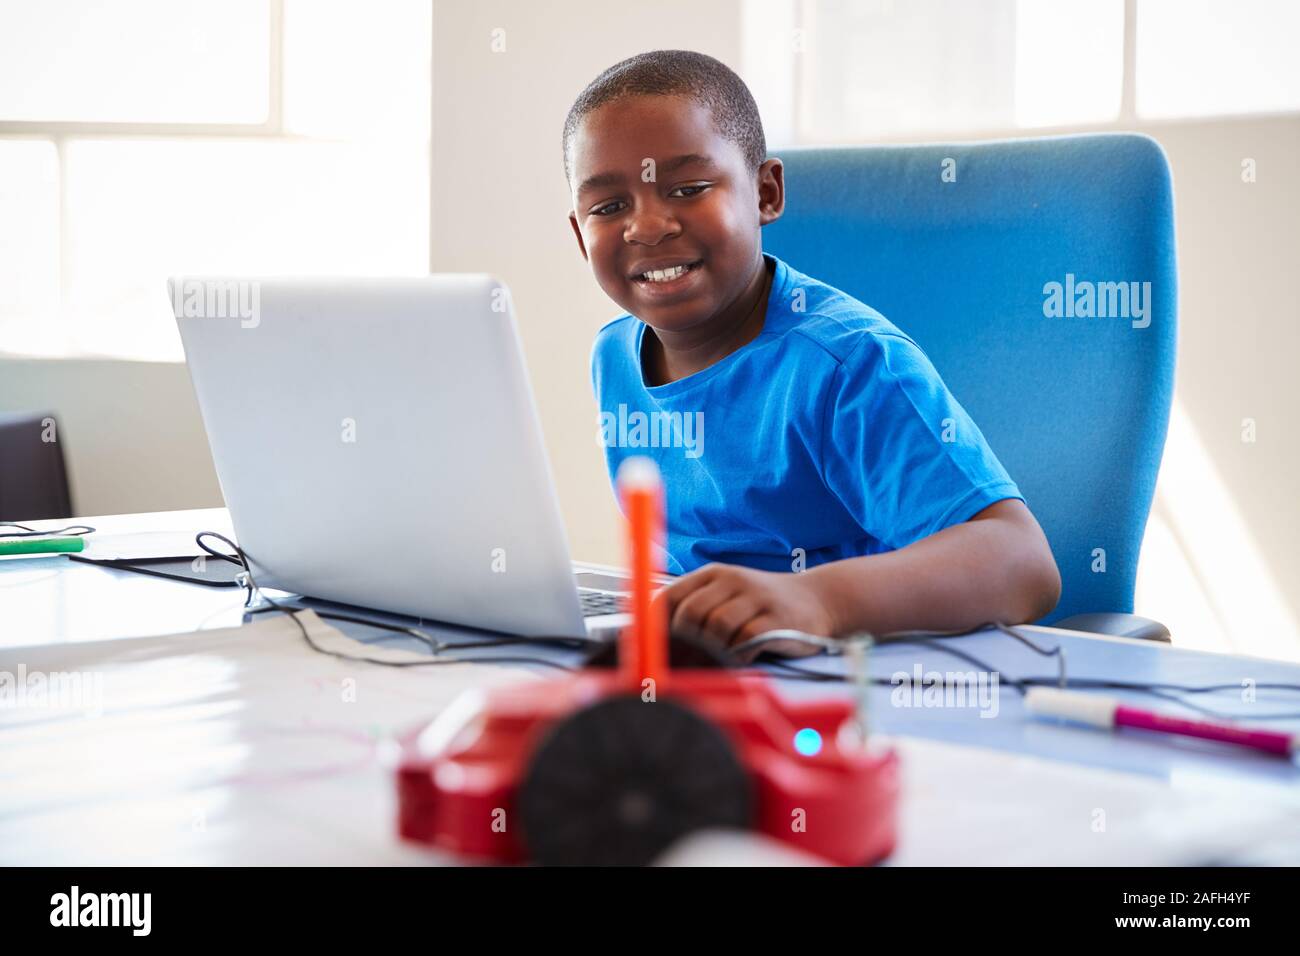 Male Student In After School Computer Coding Class Learning To Program Robot Vehicle Stock Photo